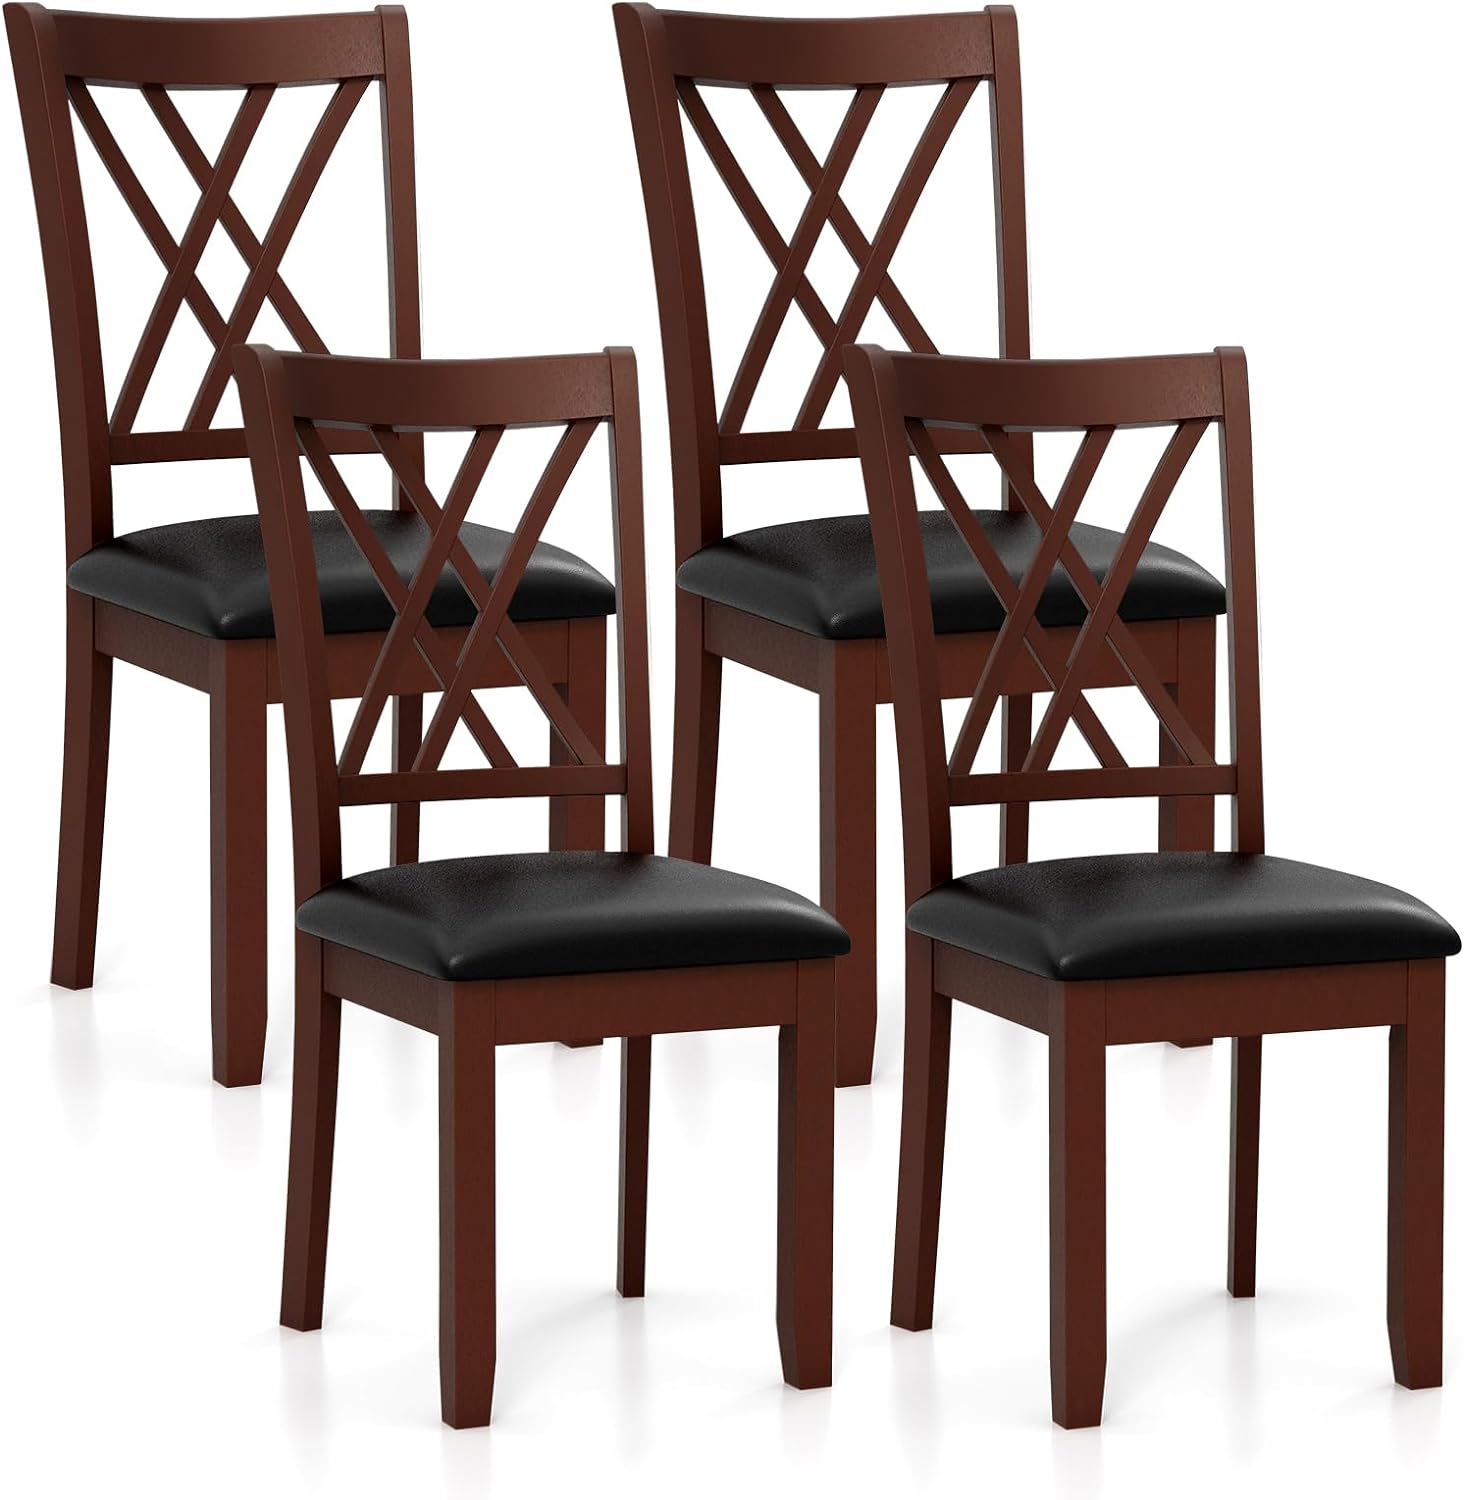 Giantex Wood Dining Chairs Set of 2, Faux Leather Upholstered Kitchen Chairs with Rubber Wood Legs